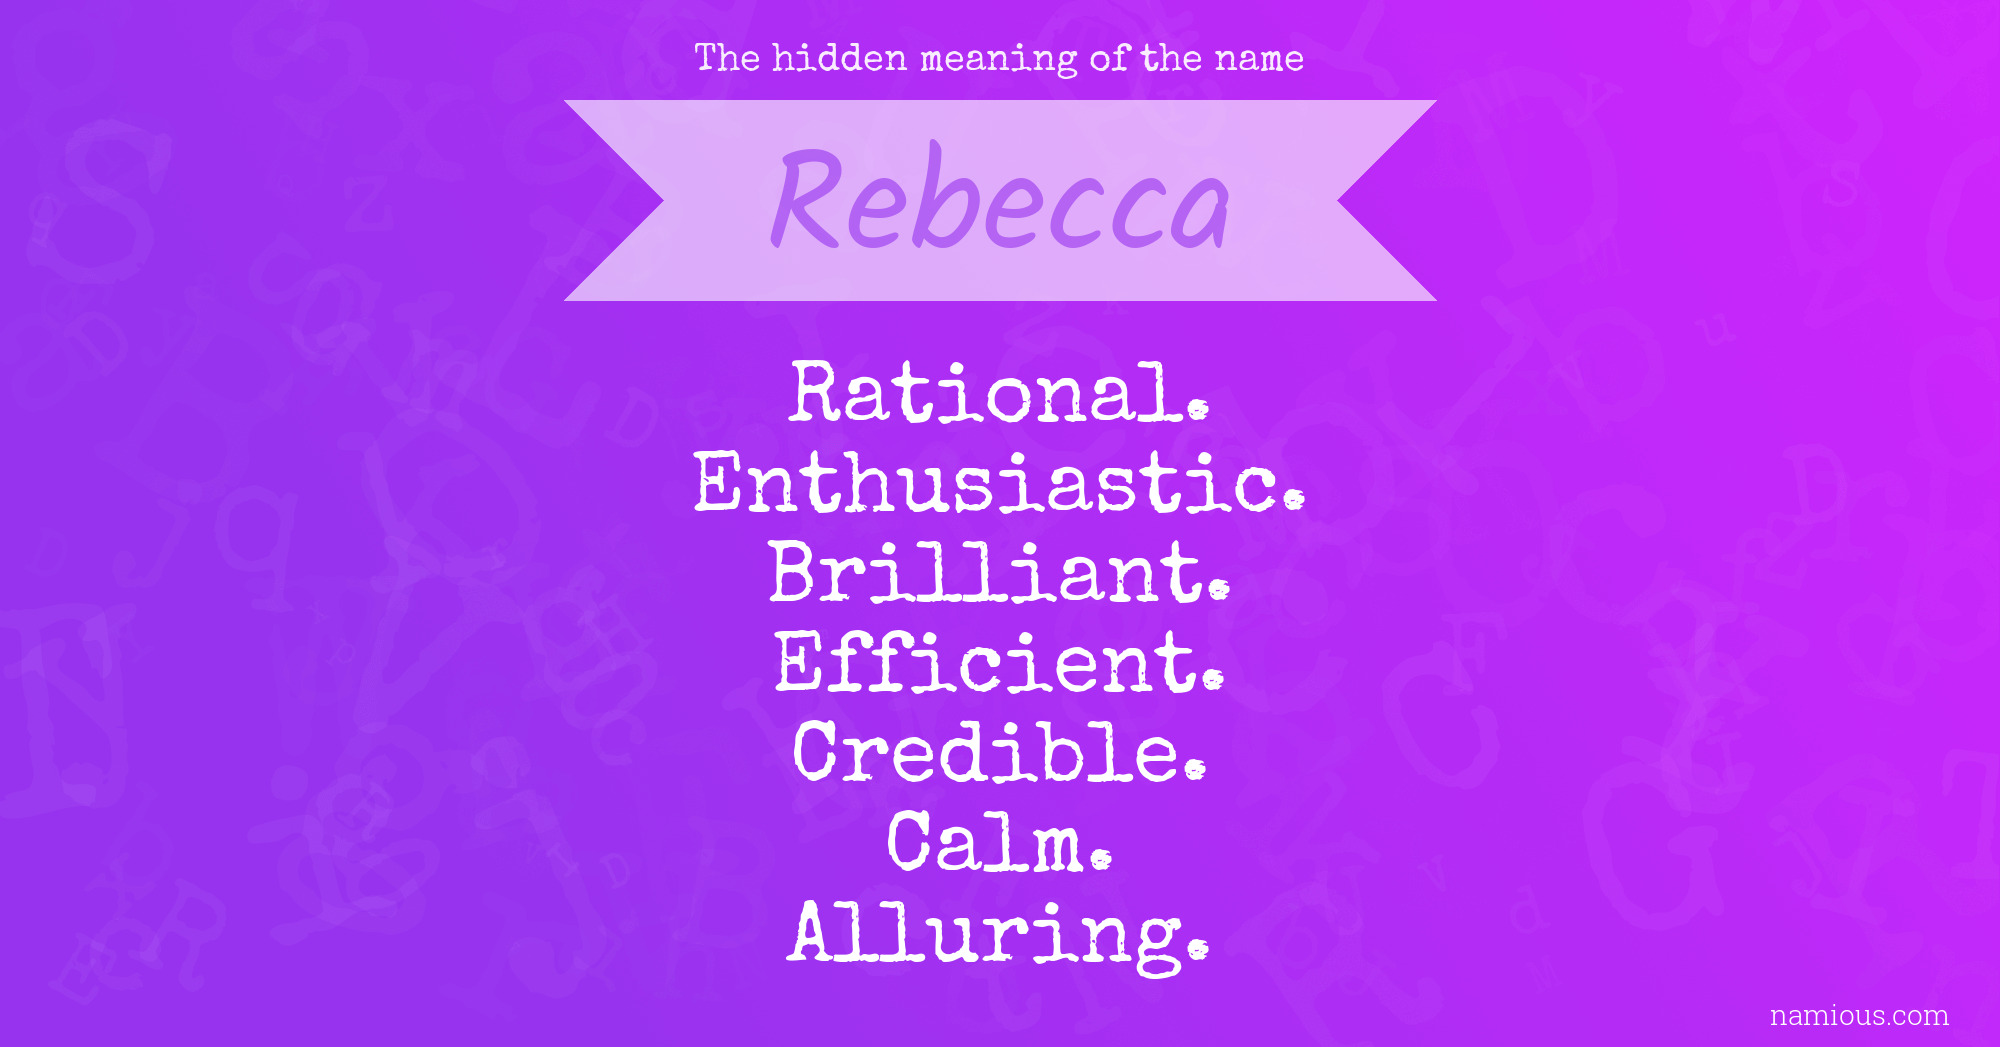 The hidden meaning of the name Rebecca